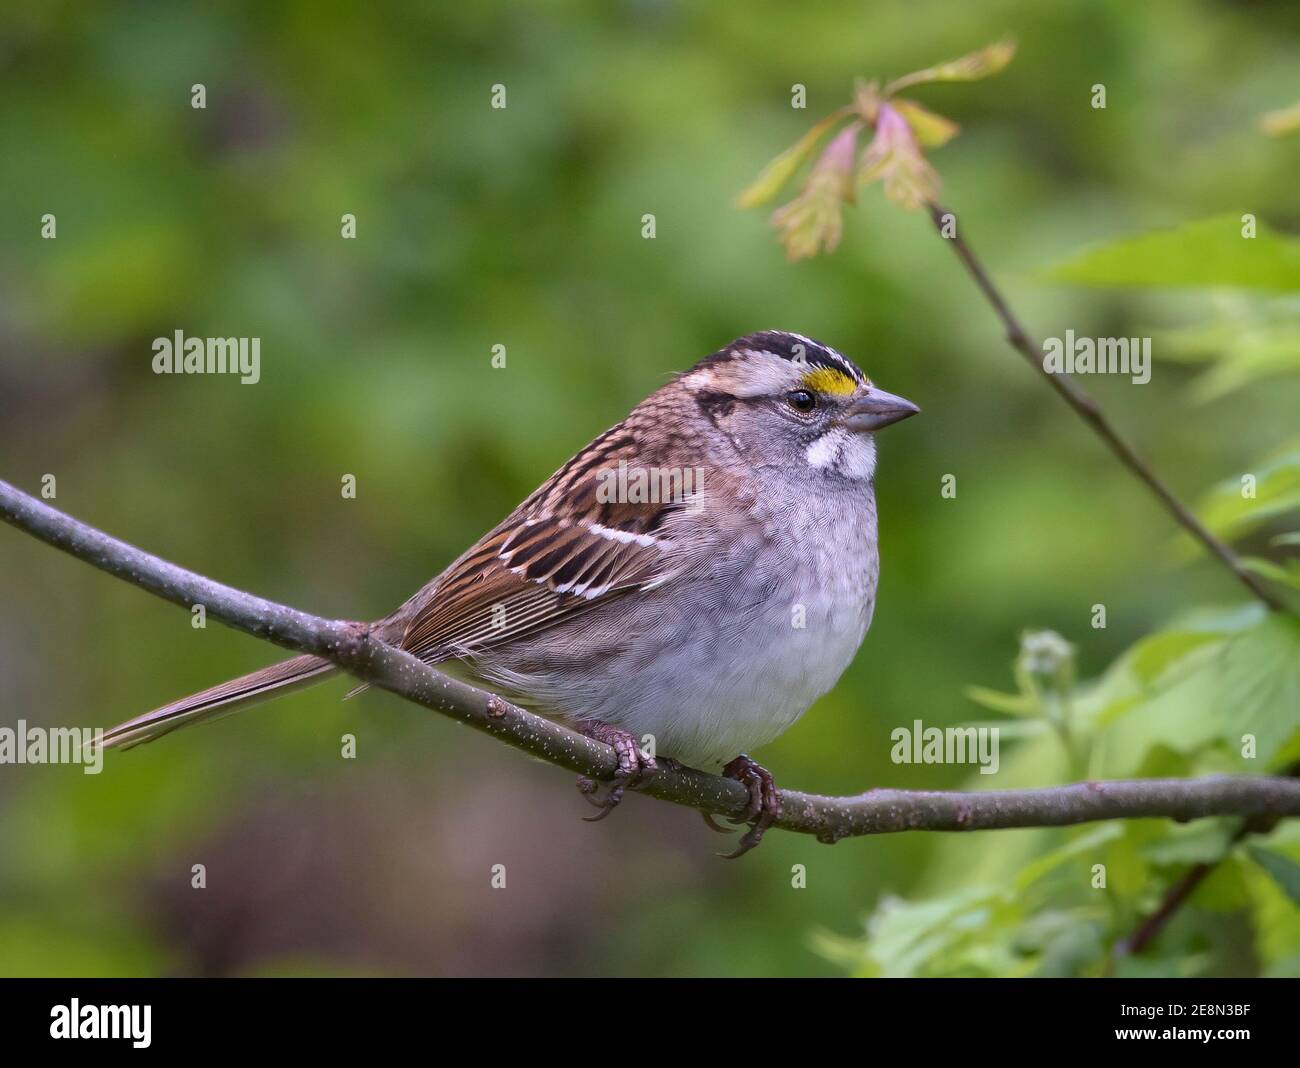 White-throated sparrow (Zonotrichia albicollis) perched on tree branch with soft green background Stock Photo